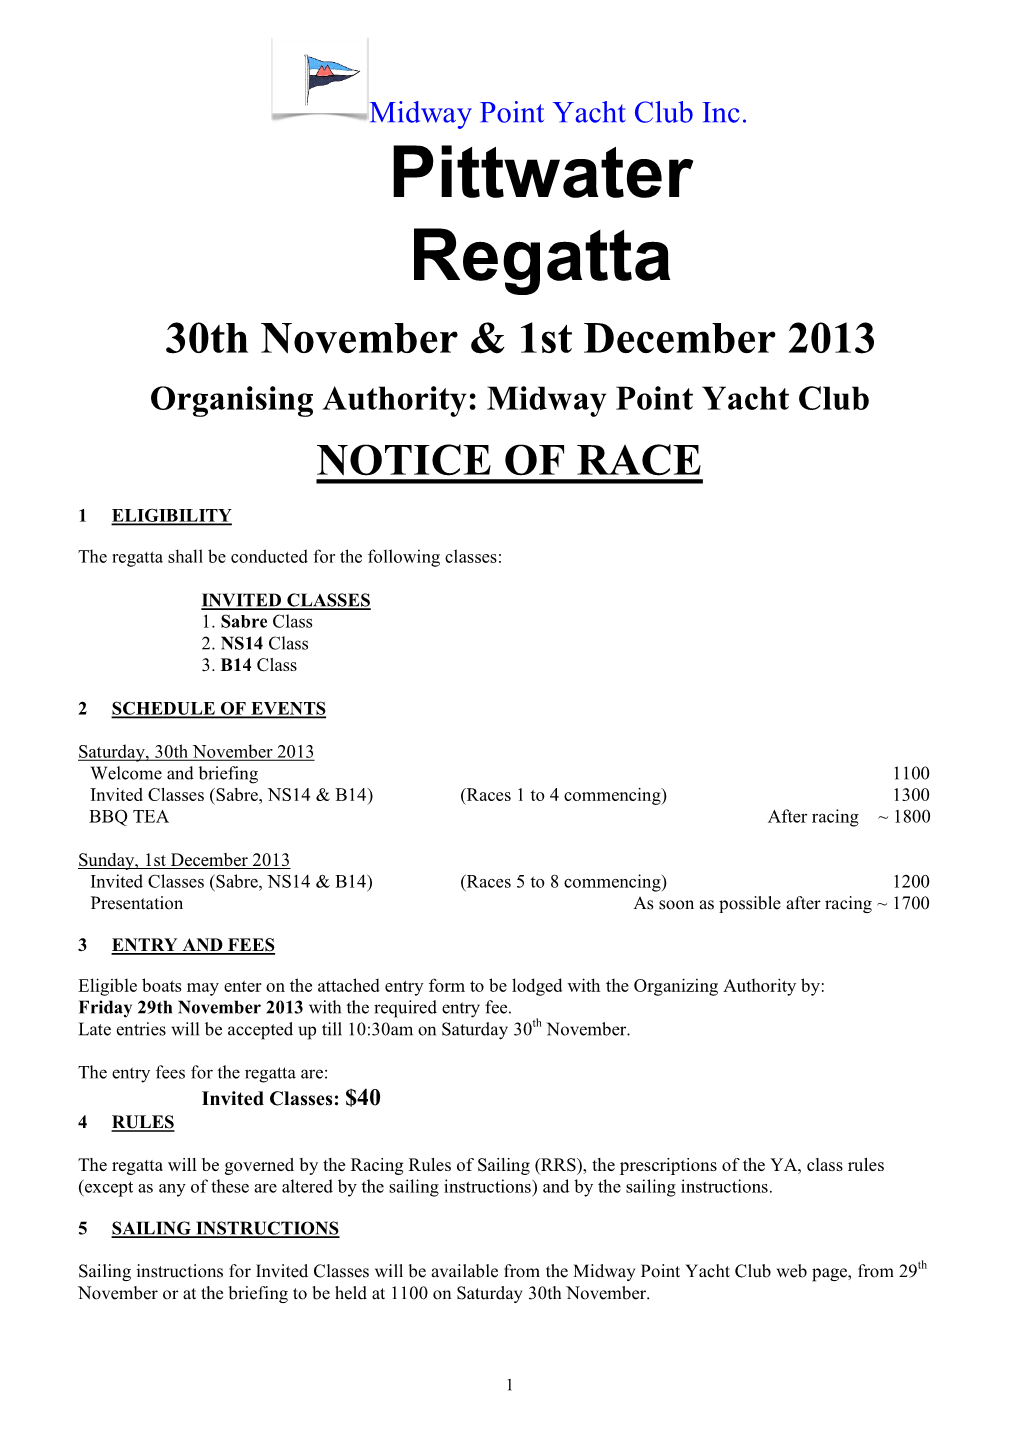 Midway Point Yacht Club NOTICE of RACE